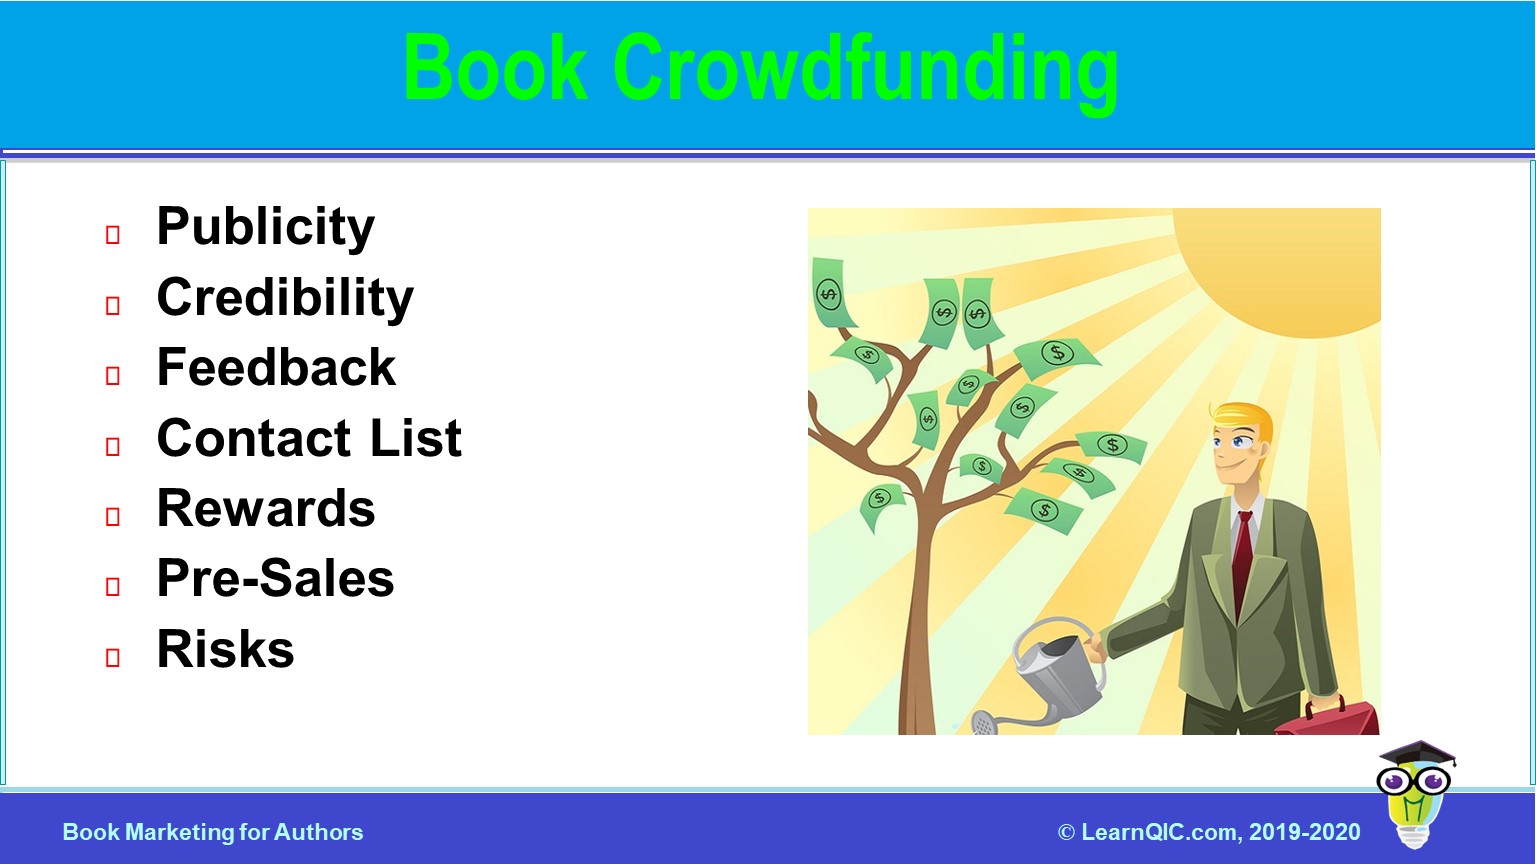 Book Crowdfunding for Publicity, Credibility, and Money